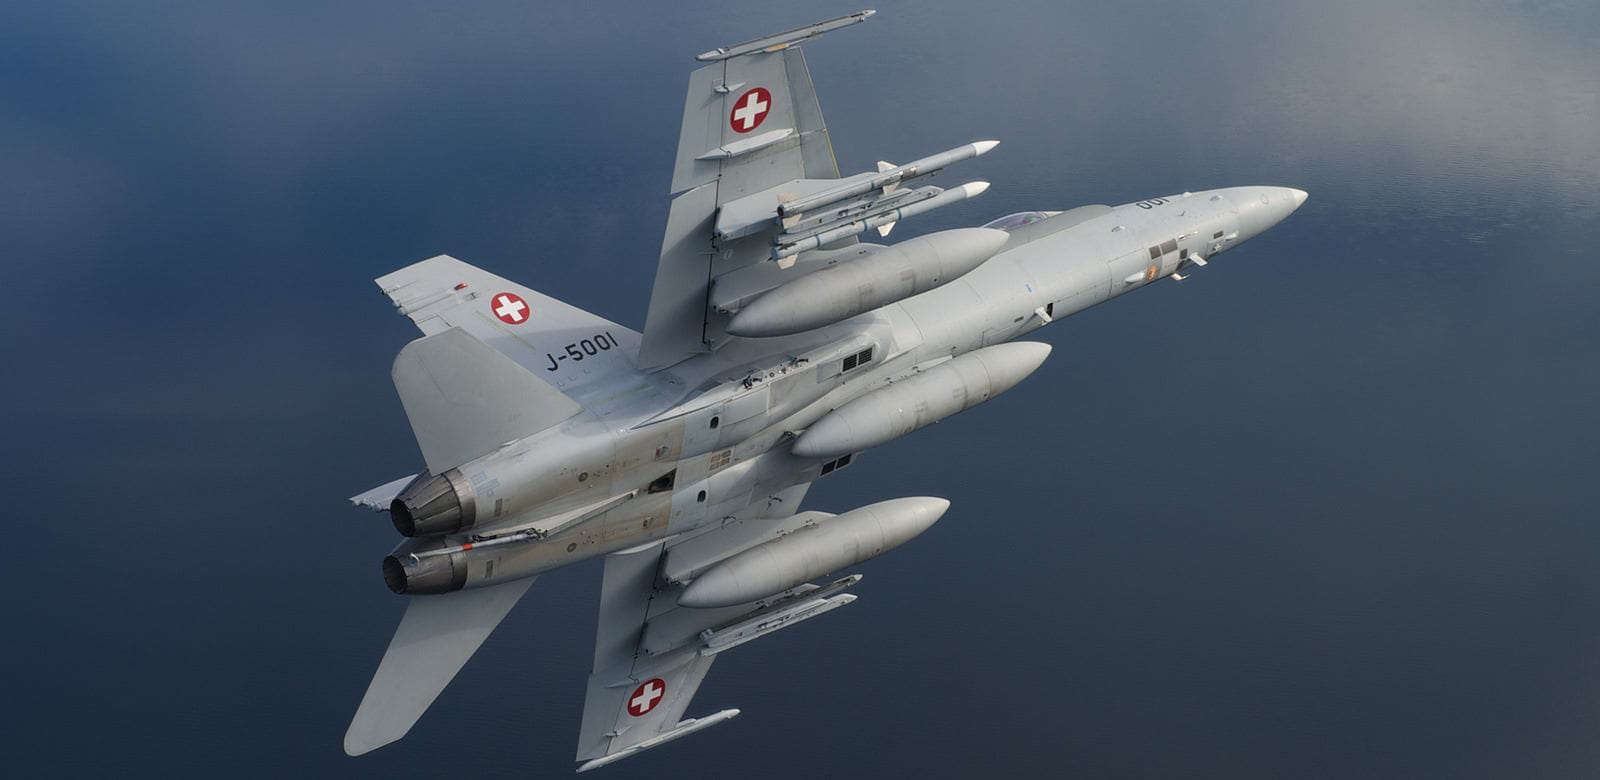 Switzerland fires an AIM-120C7 AMRAAM missile from this F-18 as part of the international Thor’s Hammer exercises in Sweden. Military leaders from four countries worked together to successfully test five AMRAAM missiles.